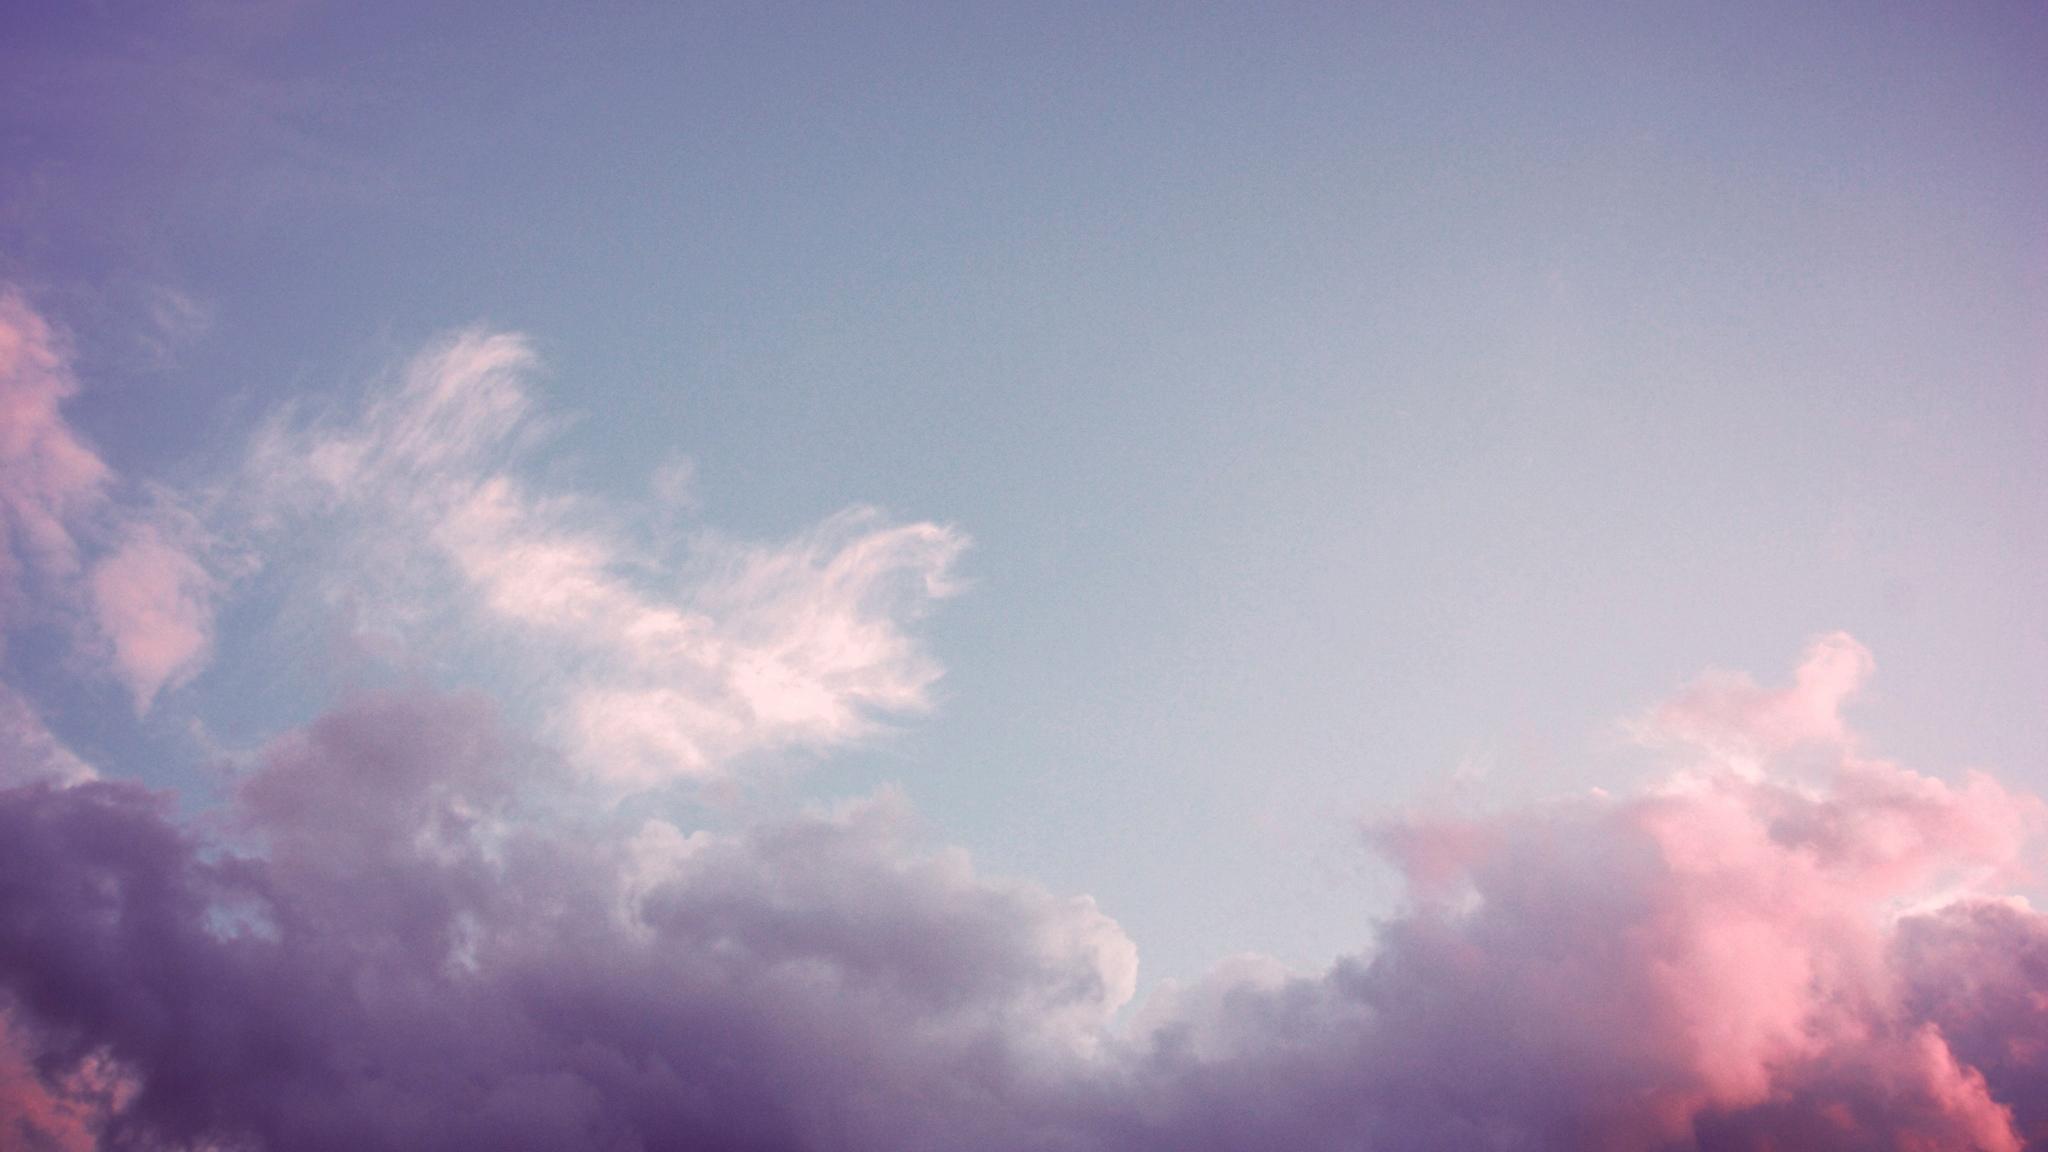 Download wallpapers 2048x1152 sky, clouds, pink ultrawide